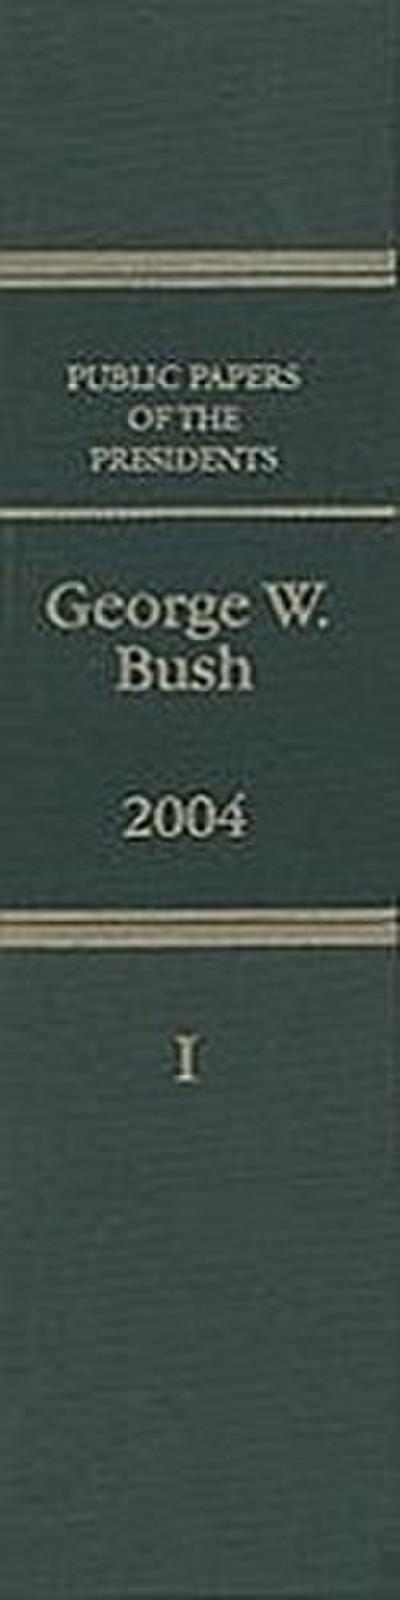 Public Papers of the Presidents of the United States, George W. Bush, 2004, Bk. 1: Jsnusry 1 to June 30, 2004